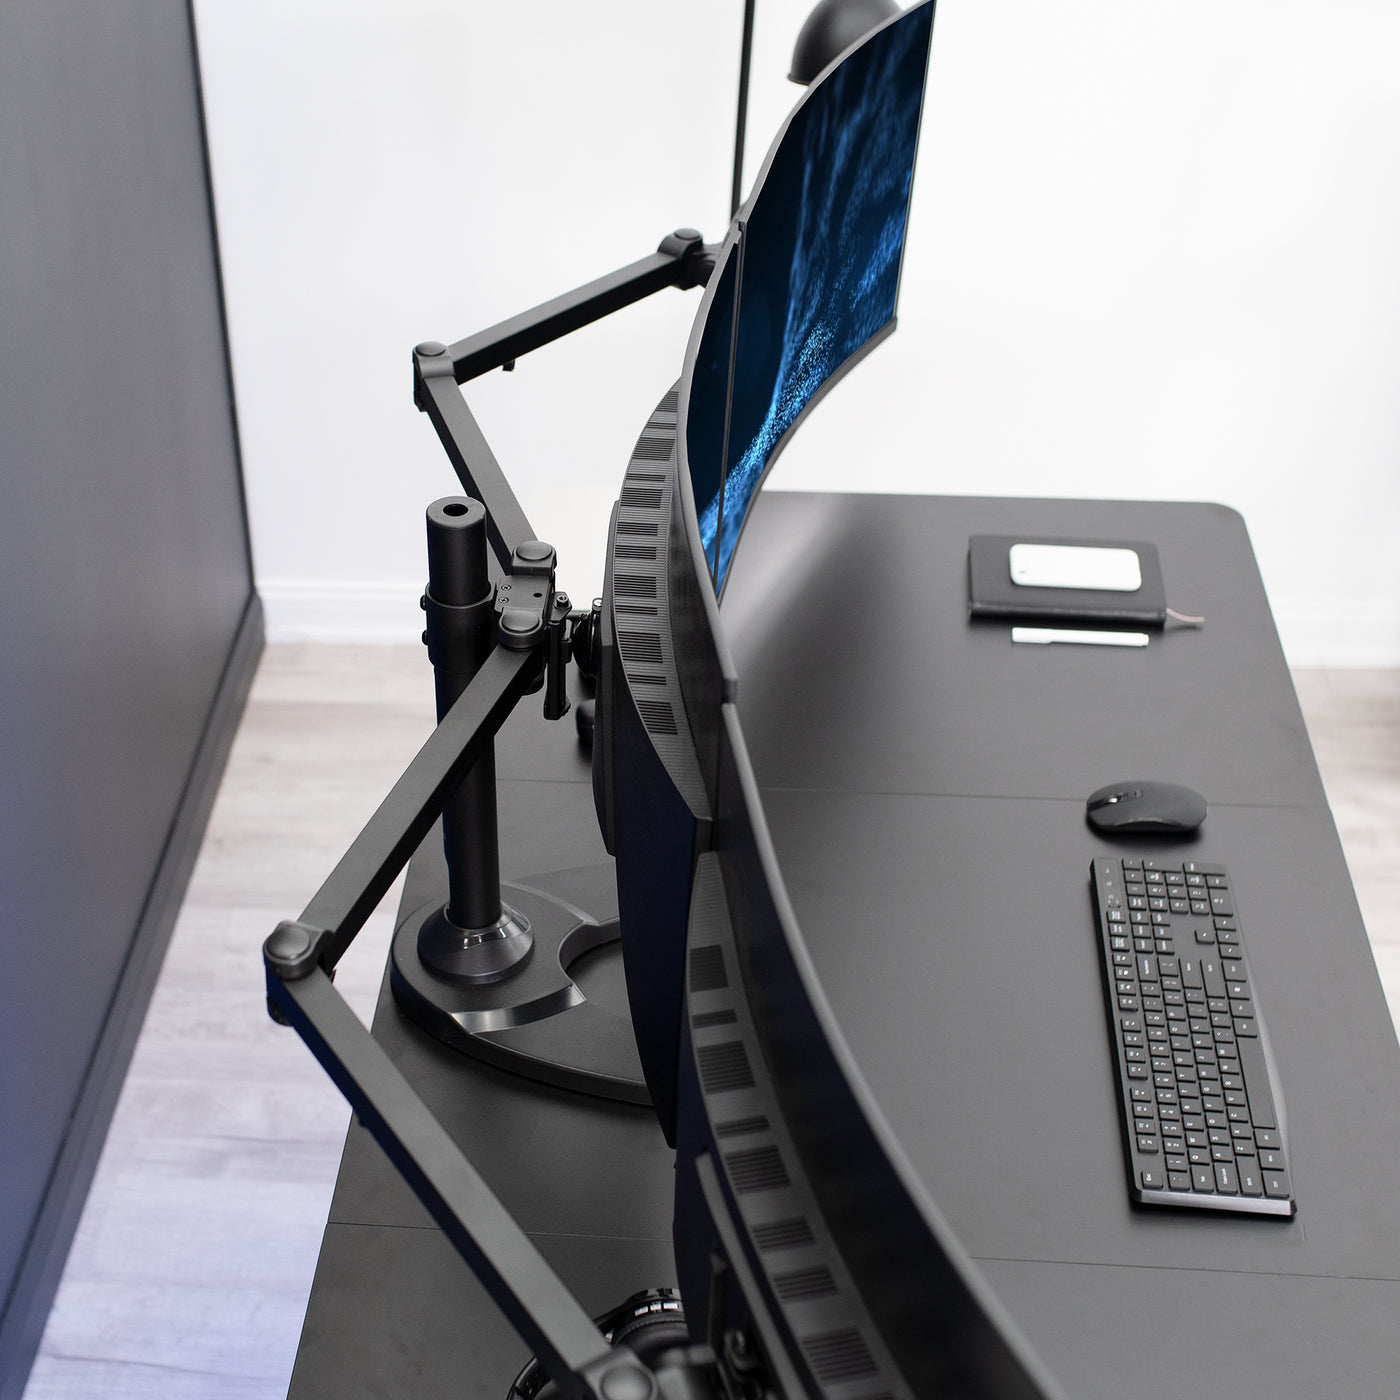 Sturdy height adjustable triple monitor desk stand.